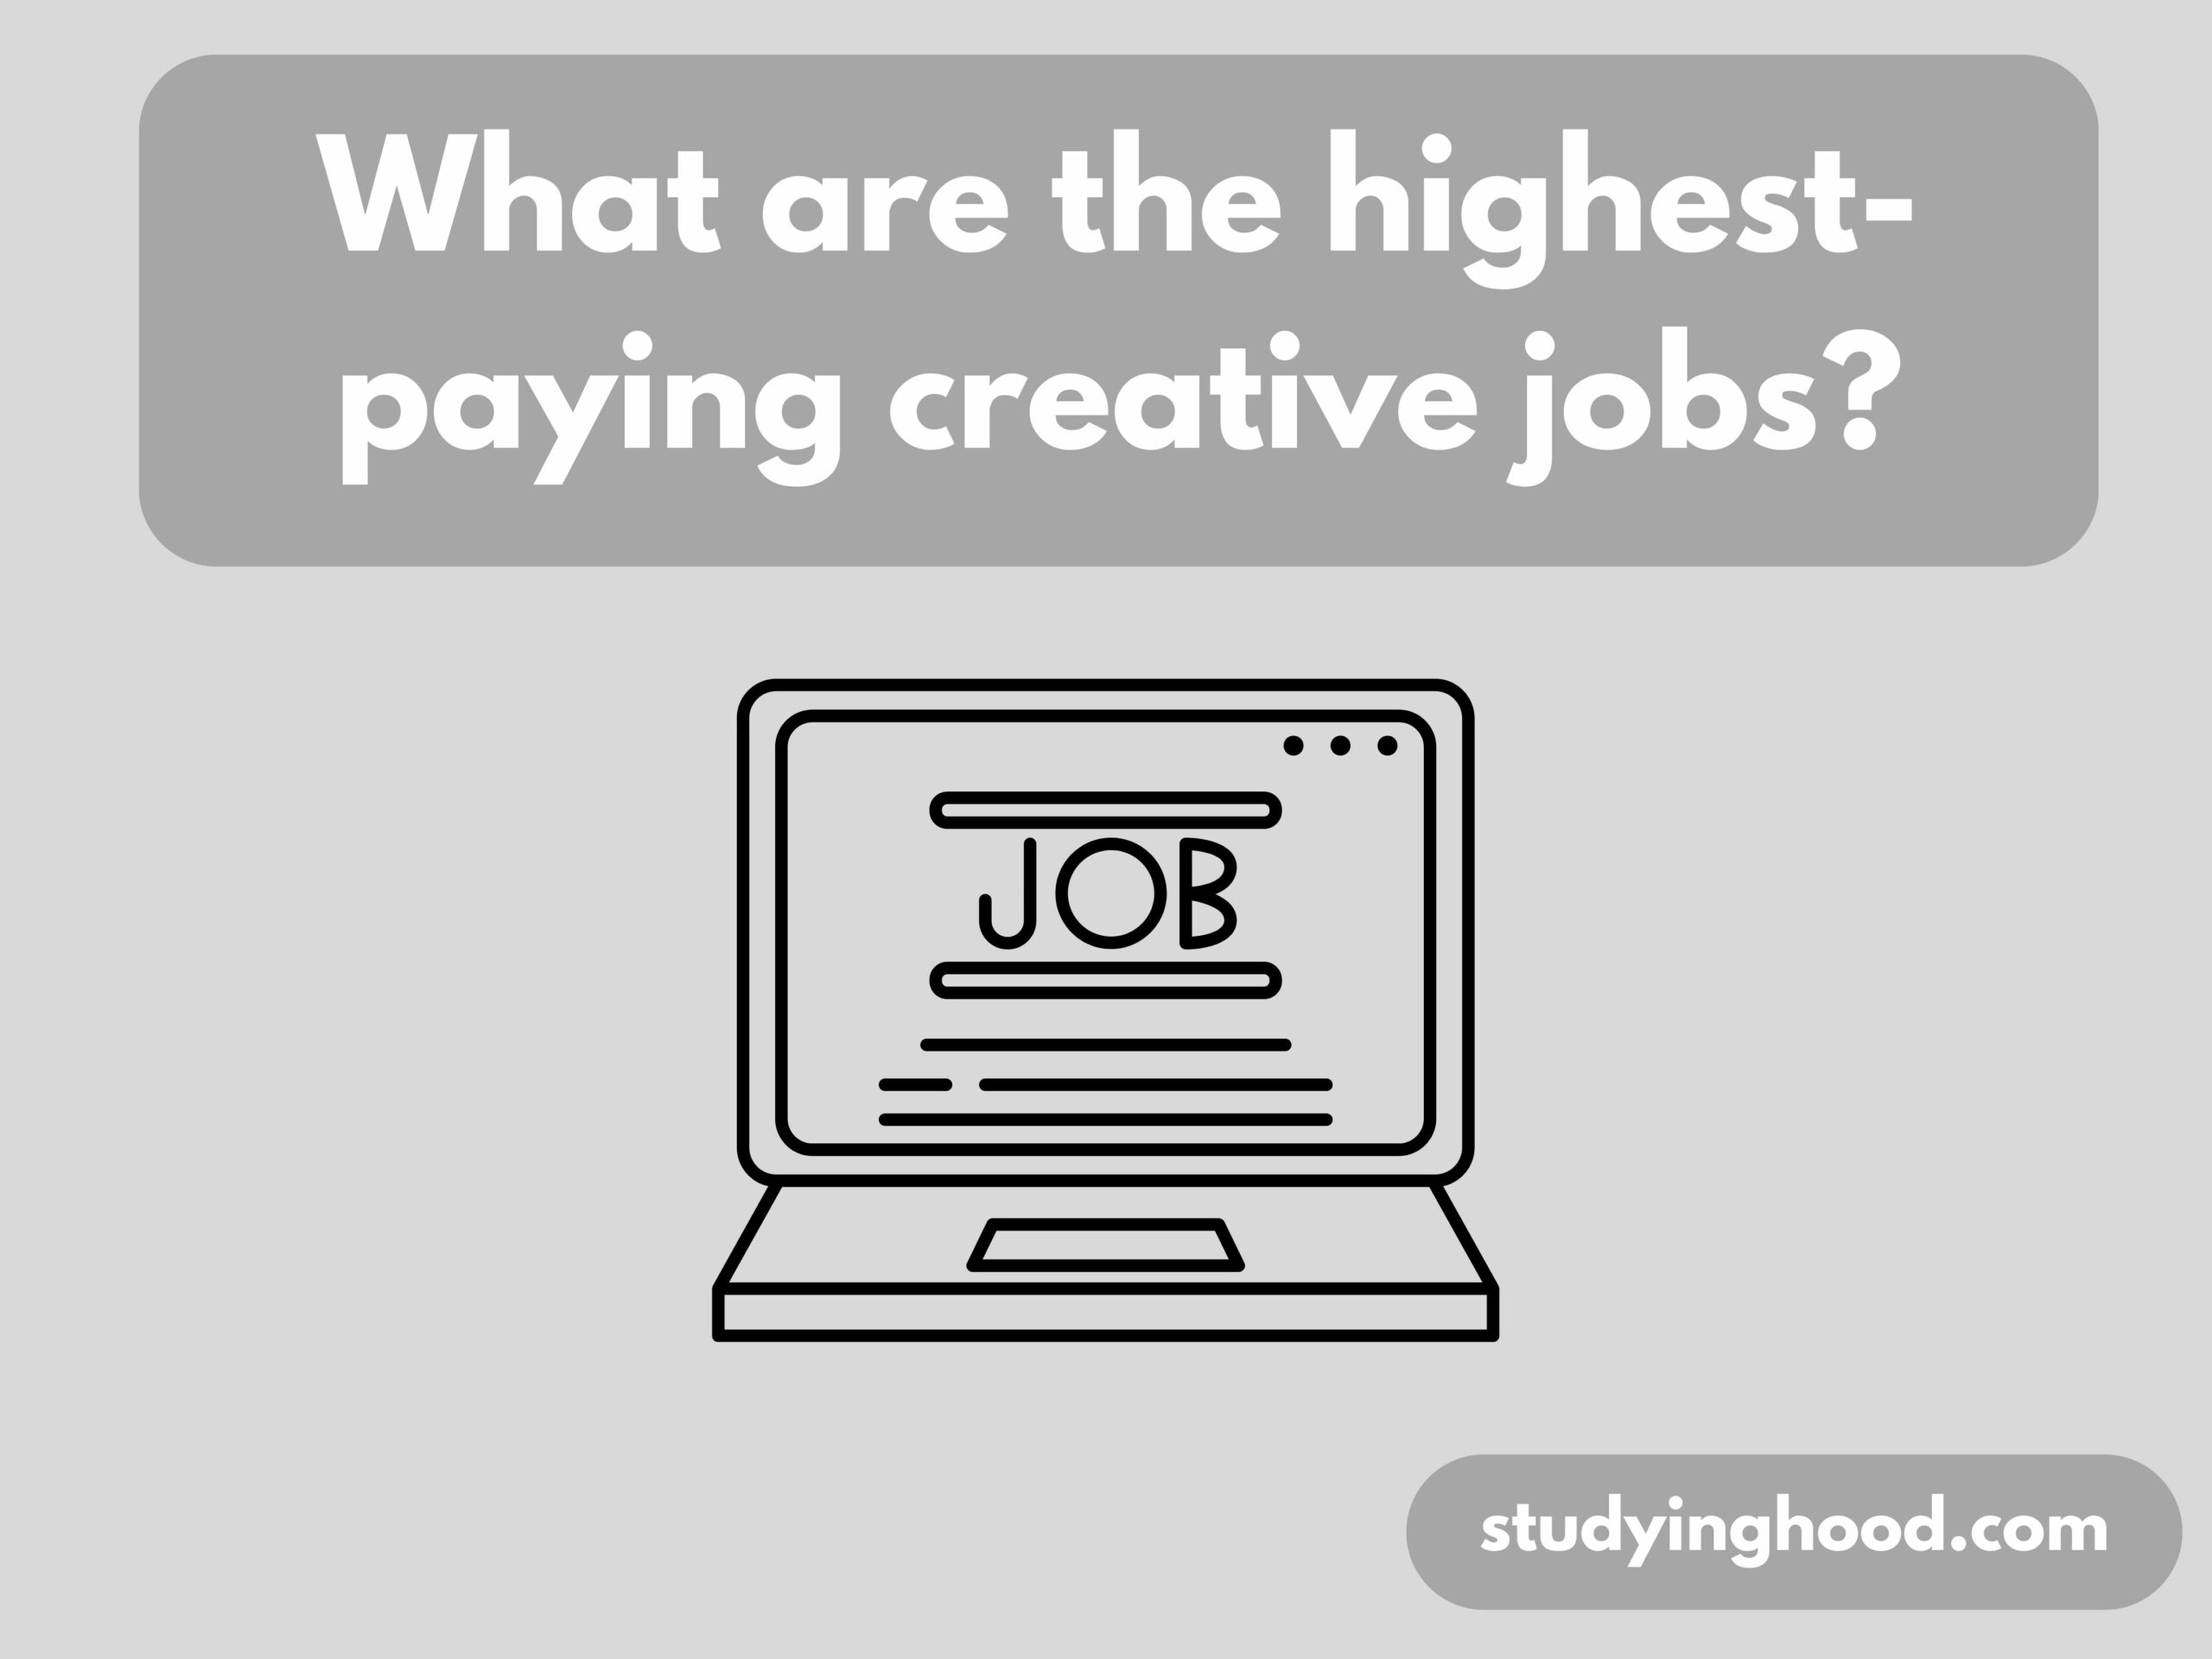 What are the highest-paying creative jobs